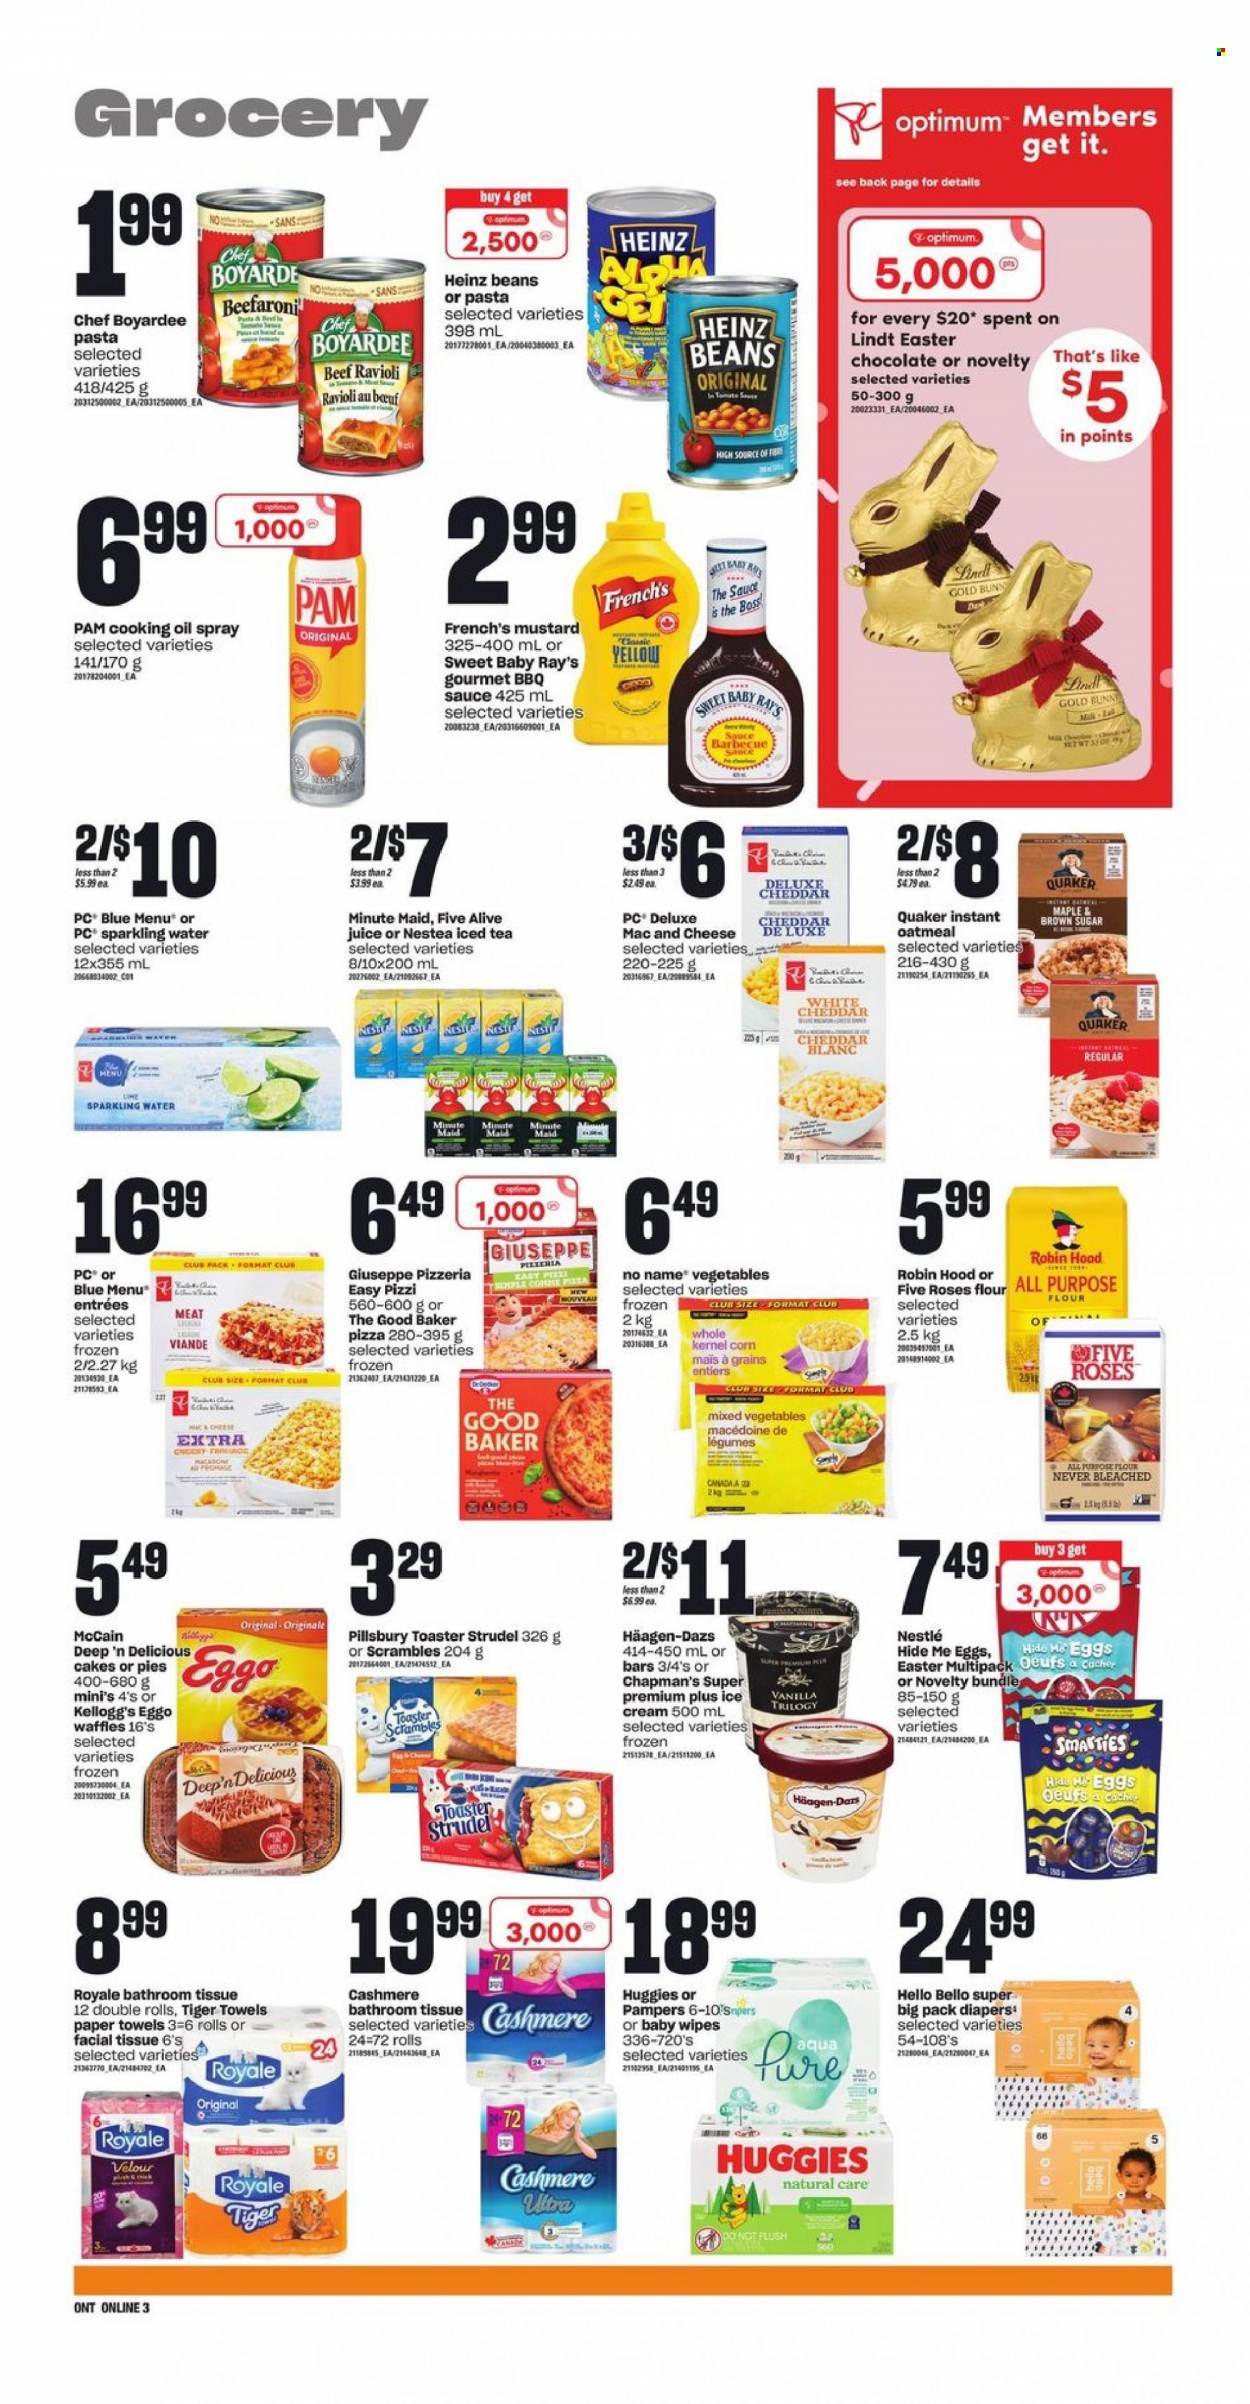 thumbnail - Independent Flyer - March 16, 2023 - March 22, 2023 - Sales products - cake, strudel, macaroons, waffles, beans, corn, No Name, ravioli, pizza, Pillsbury, Quaker, cheddar, milk, eggs, ice cream, Häagen-Dazs, mixed vegetables, McCain, Kellogg's, all purpose flour, cane sugar, flour, oatmeal, Chef Boyardee, BBQ sauce, mustard, oil, cooking oil, juice, ice tea, fruit punch, sparkling water, water, wipes, Pampers, baby wipes, nappies, bath tissue, kitchen towels, paper towels, Optimum, rode, Nestlé, Heinz, Huggies, Lindt, Smarties. Page 7.